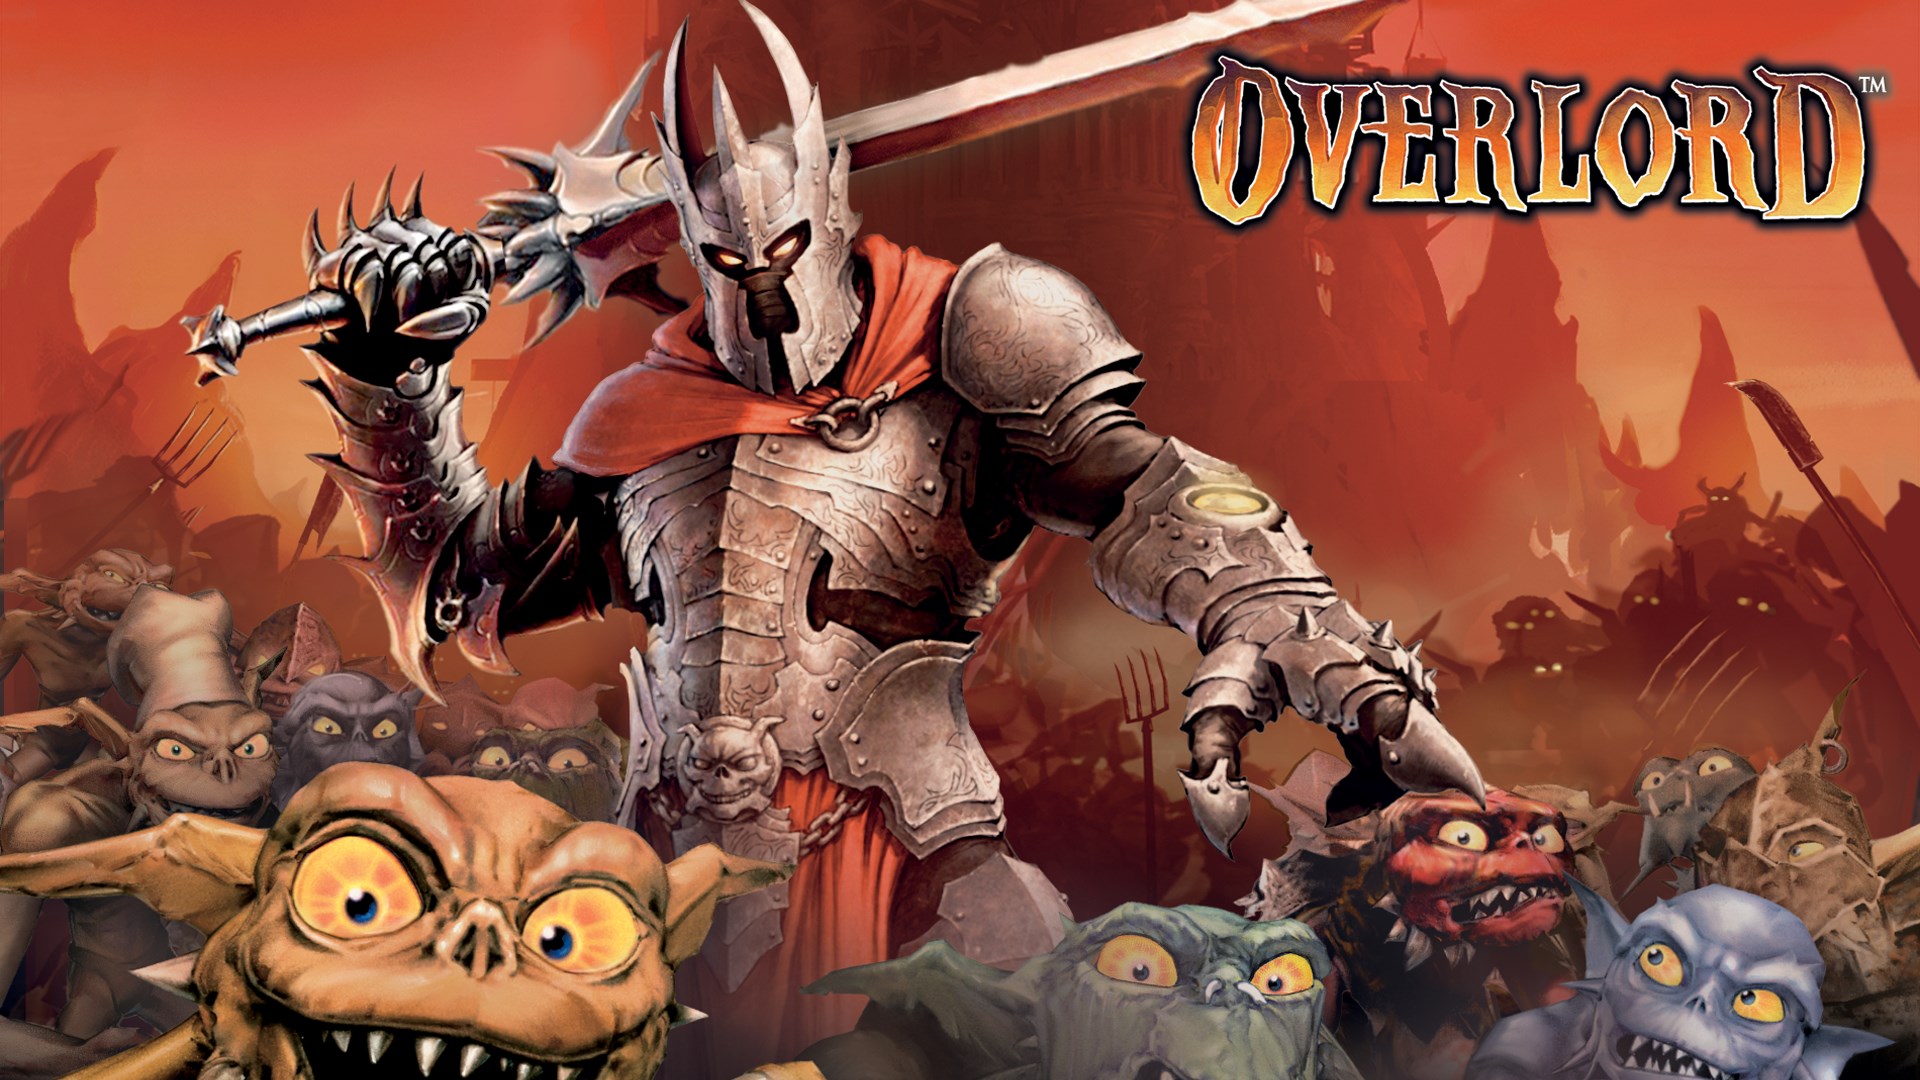 overlord xbox 360